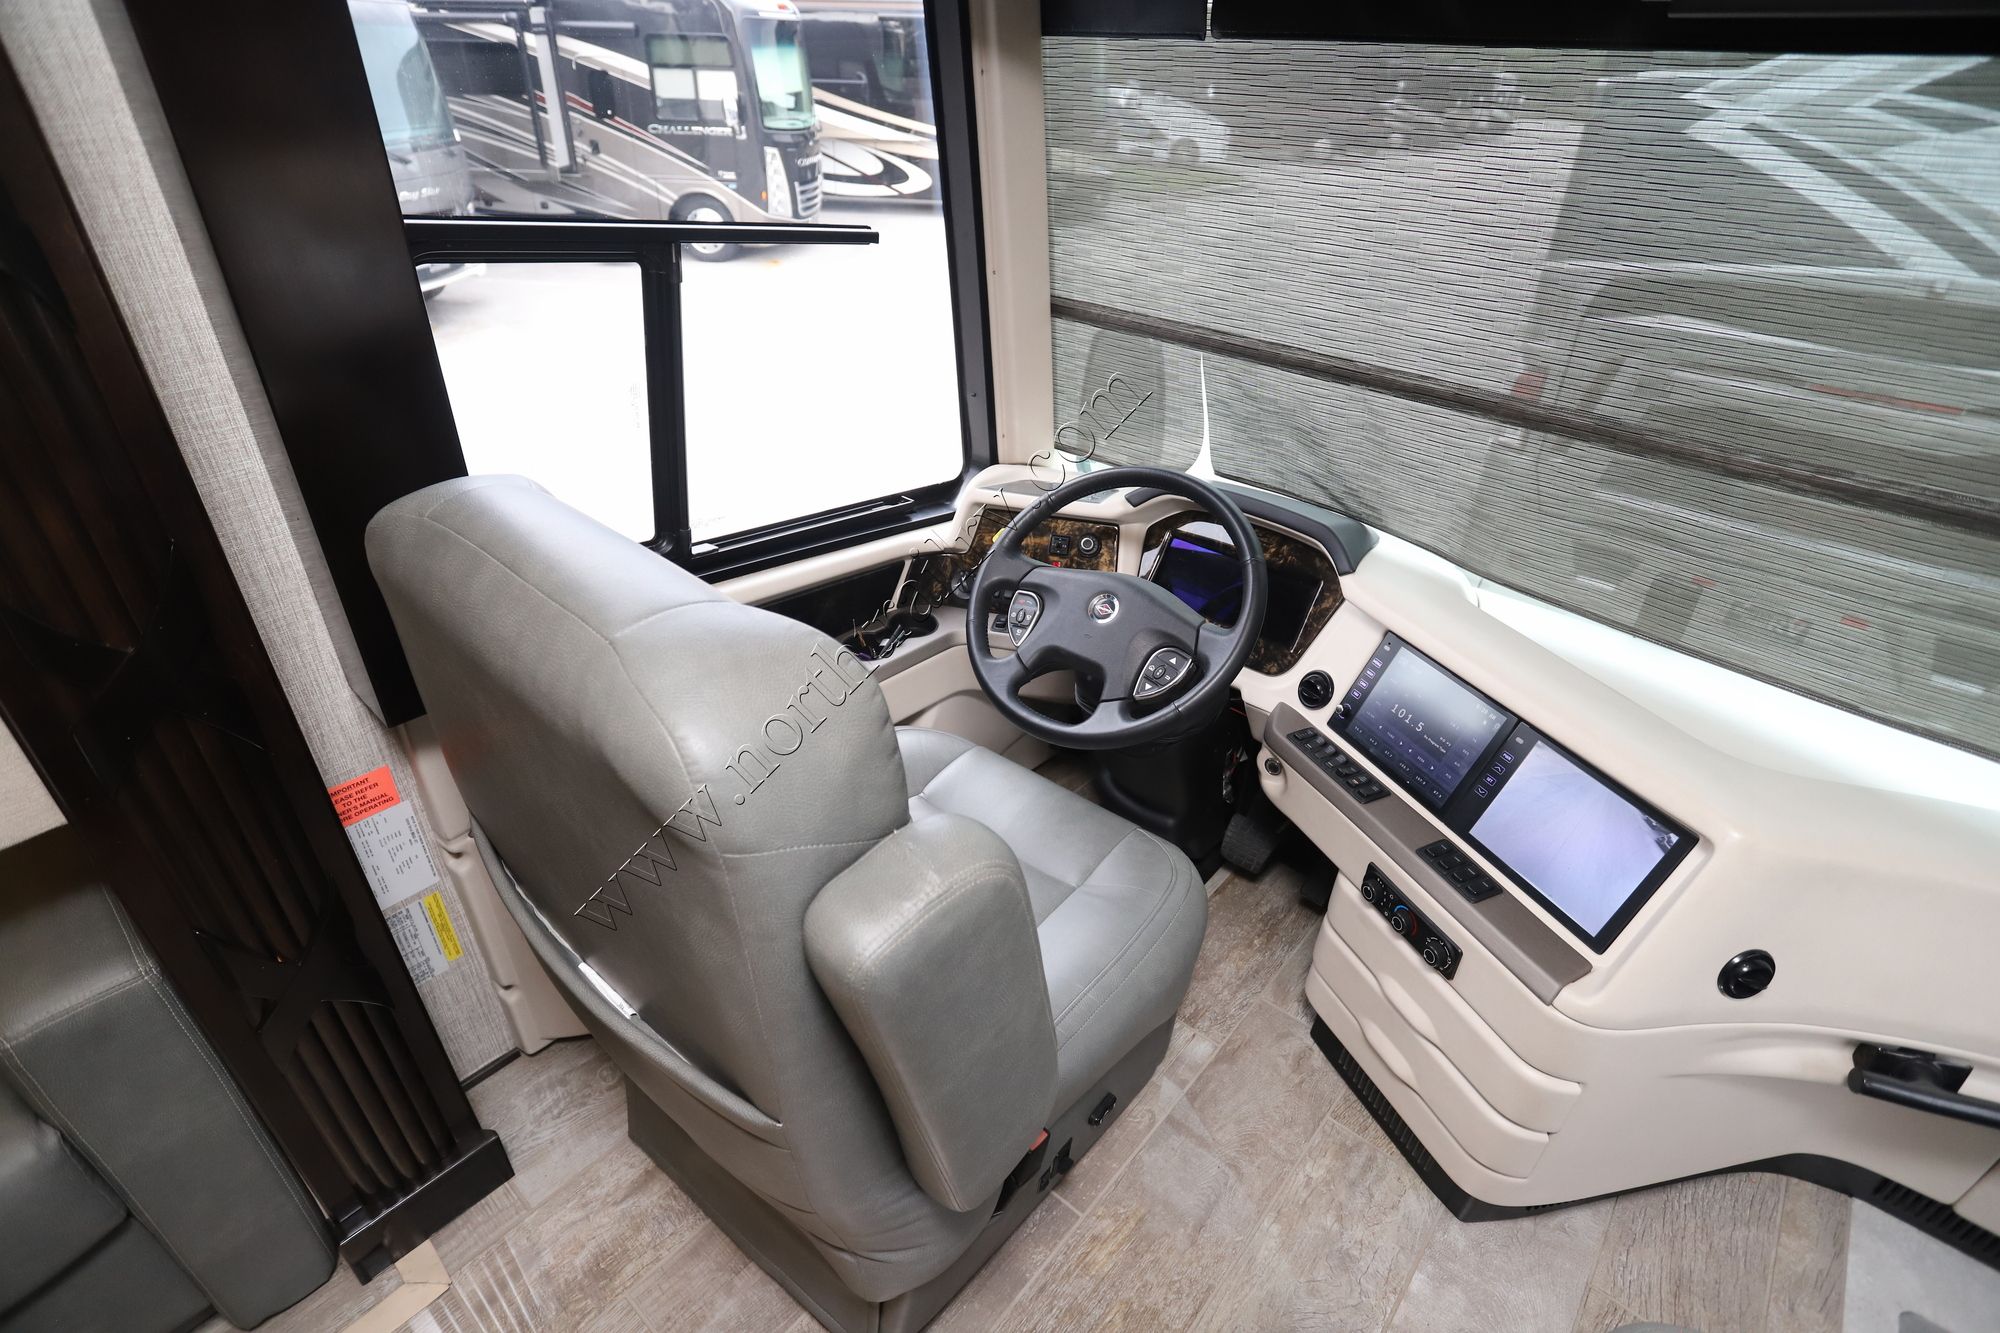 Used 2021 Newmar Mountain Aire 4535 Class A  For Sale